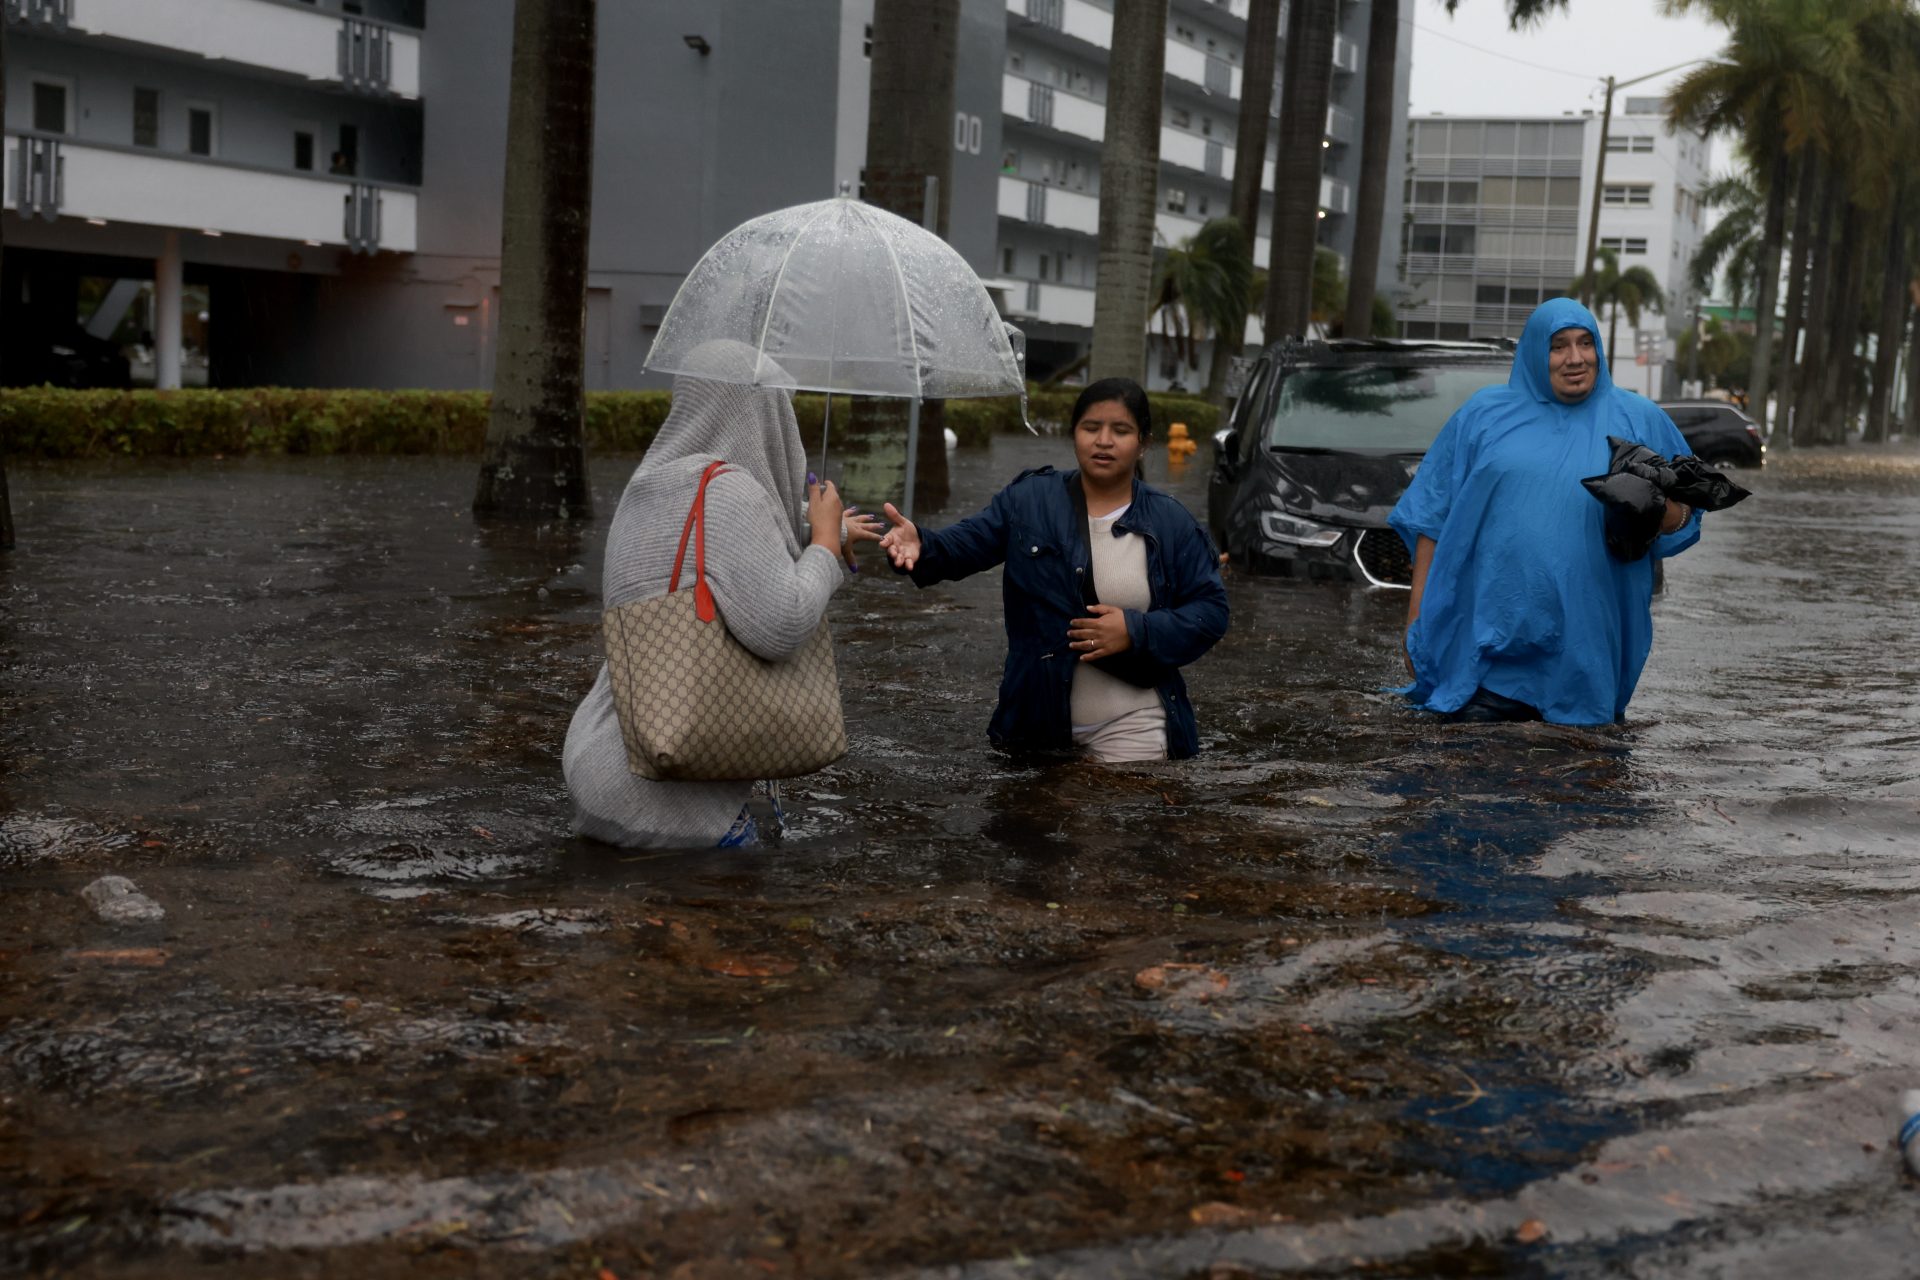 In pictures: a week of heavy rain and flooding in Florida